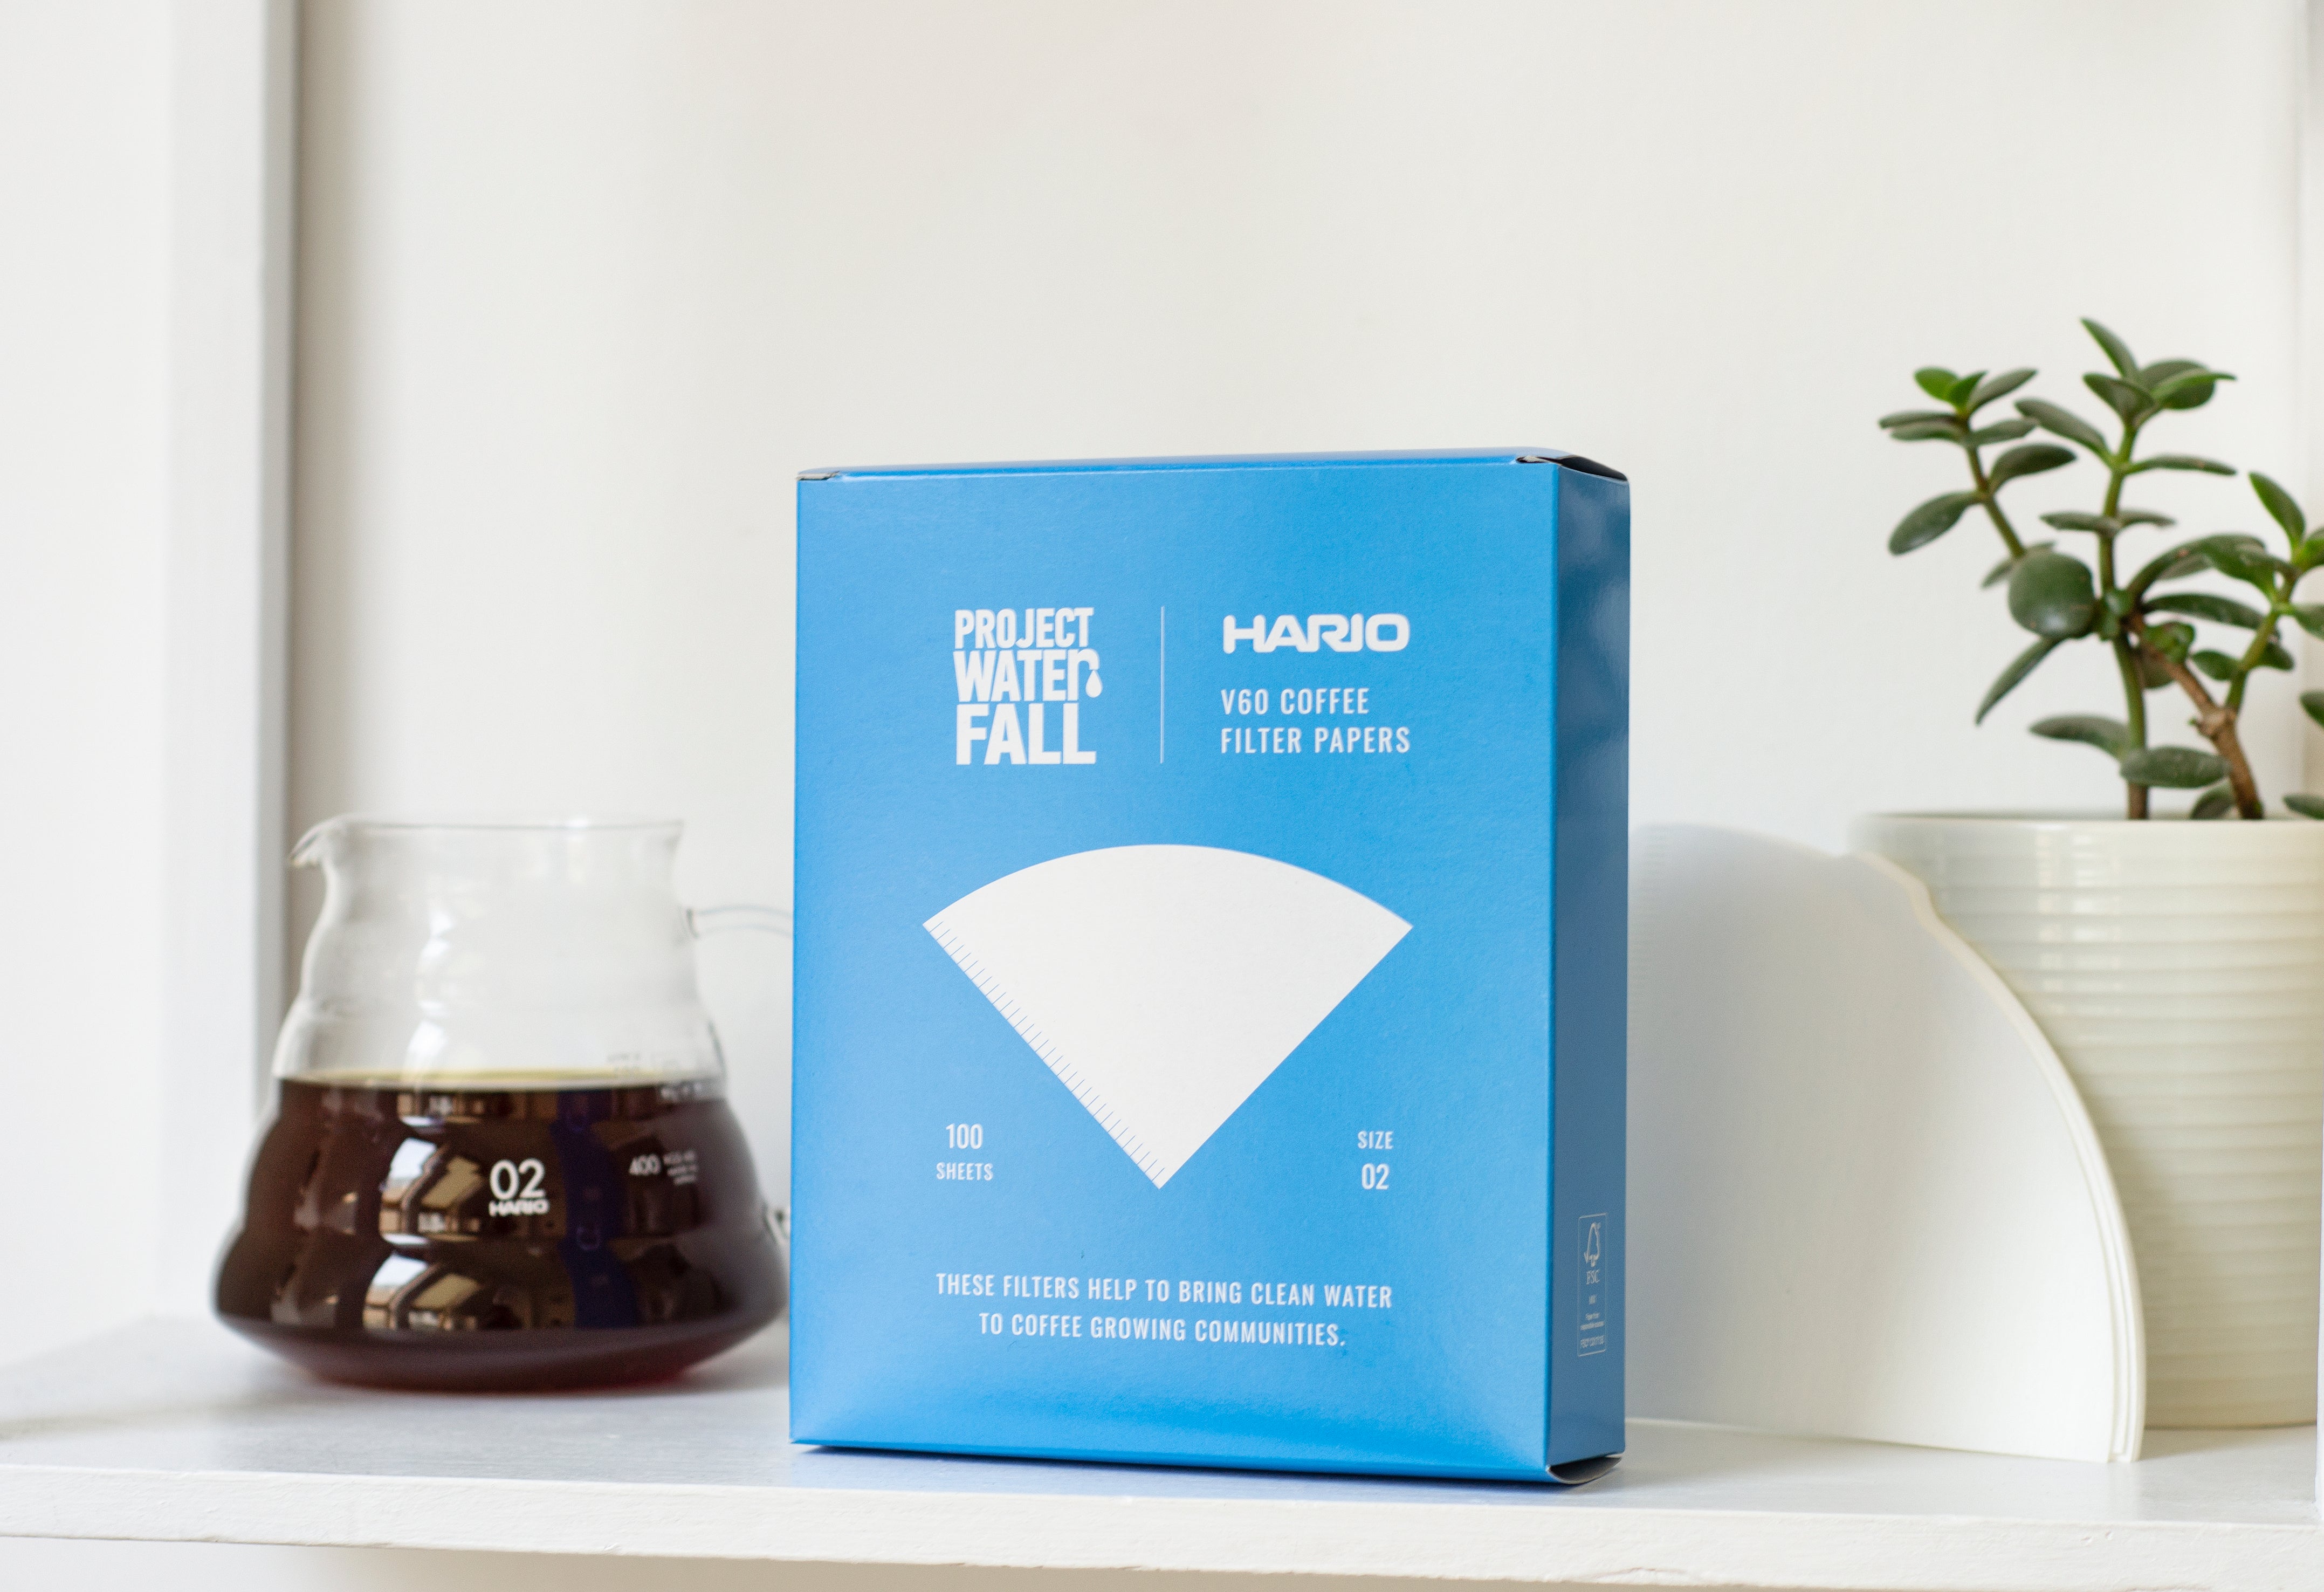 Hario X Project Waterfall V60 Coffee Filter Papers Size 02 (100 pack)